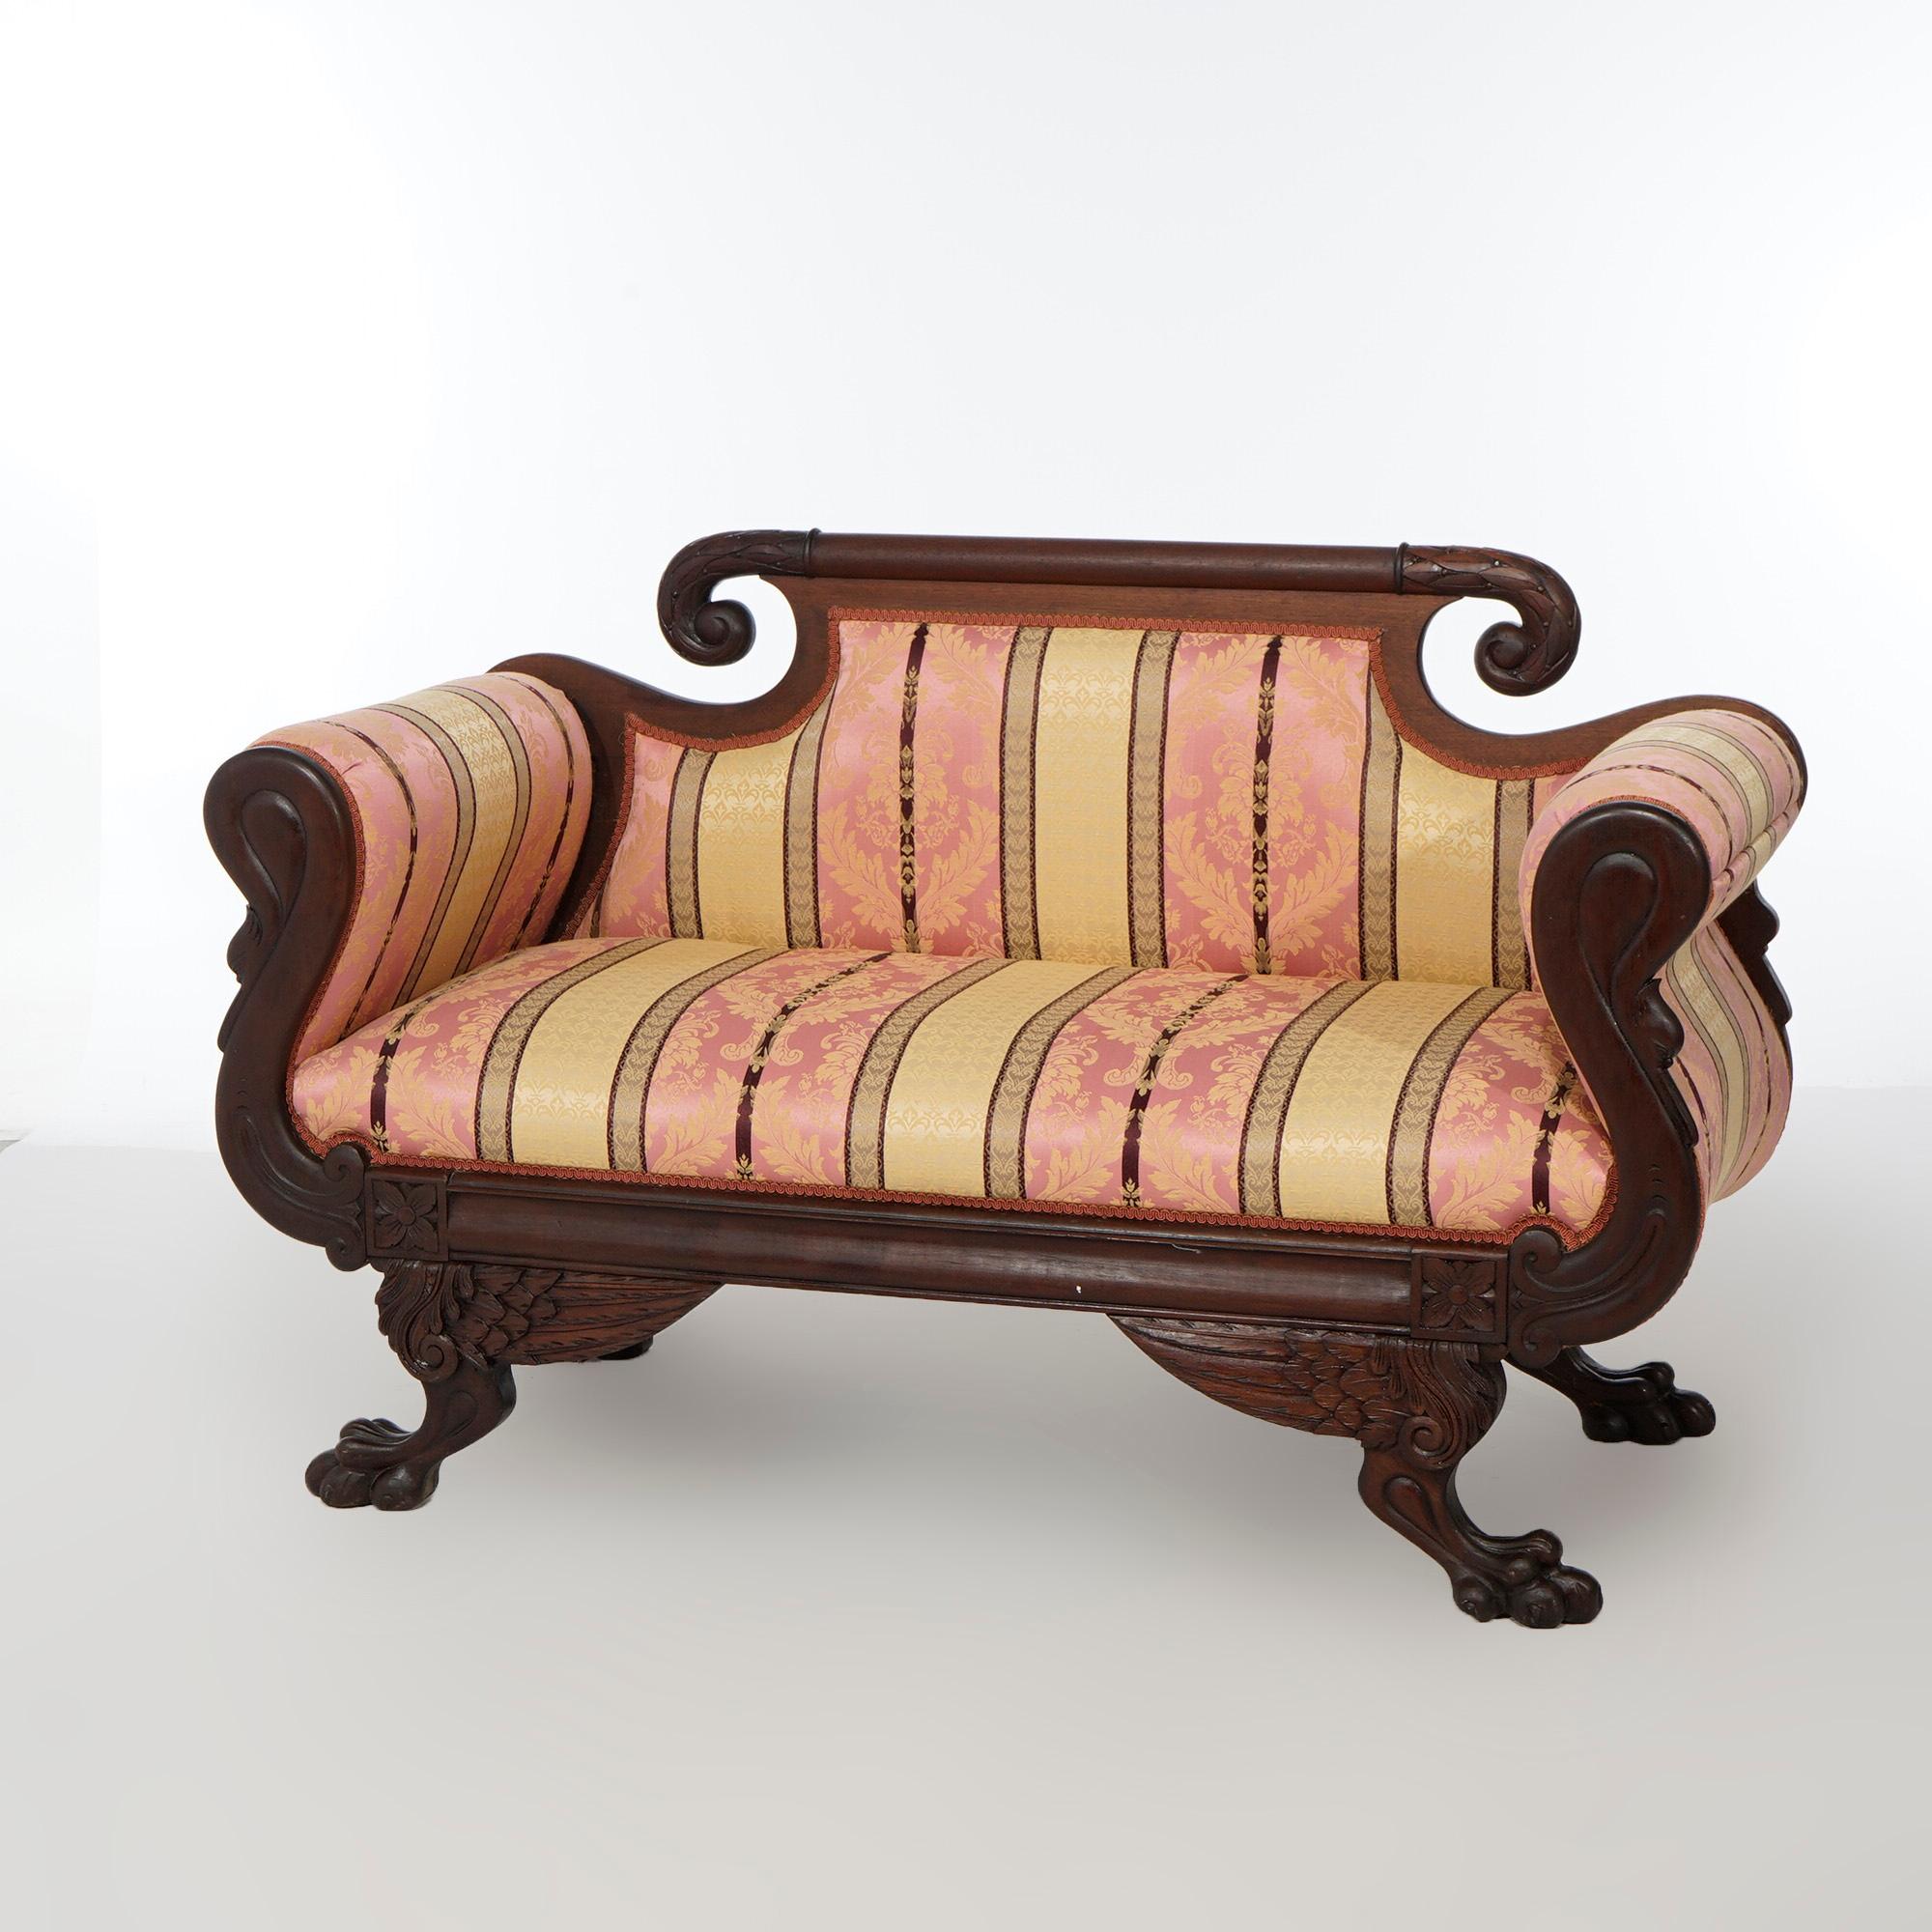 An antique American Empire Classical Greco figural sofa offers mahogany frame with scroll form crest over upholstered back, seat and arms, carved gooseneck arms, raised on foliate carved legs terminating in paw feet, c1840.
***Matching armchair